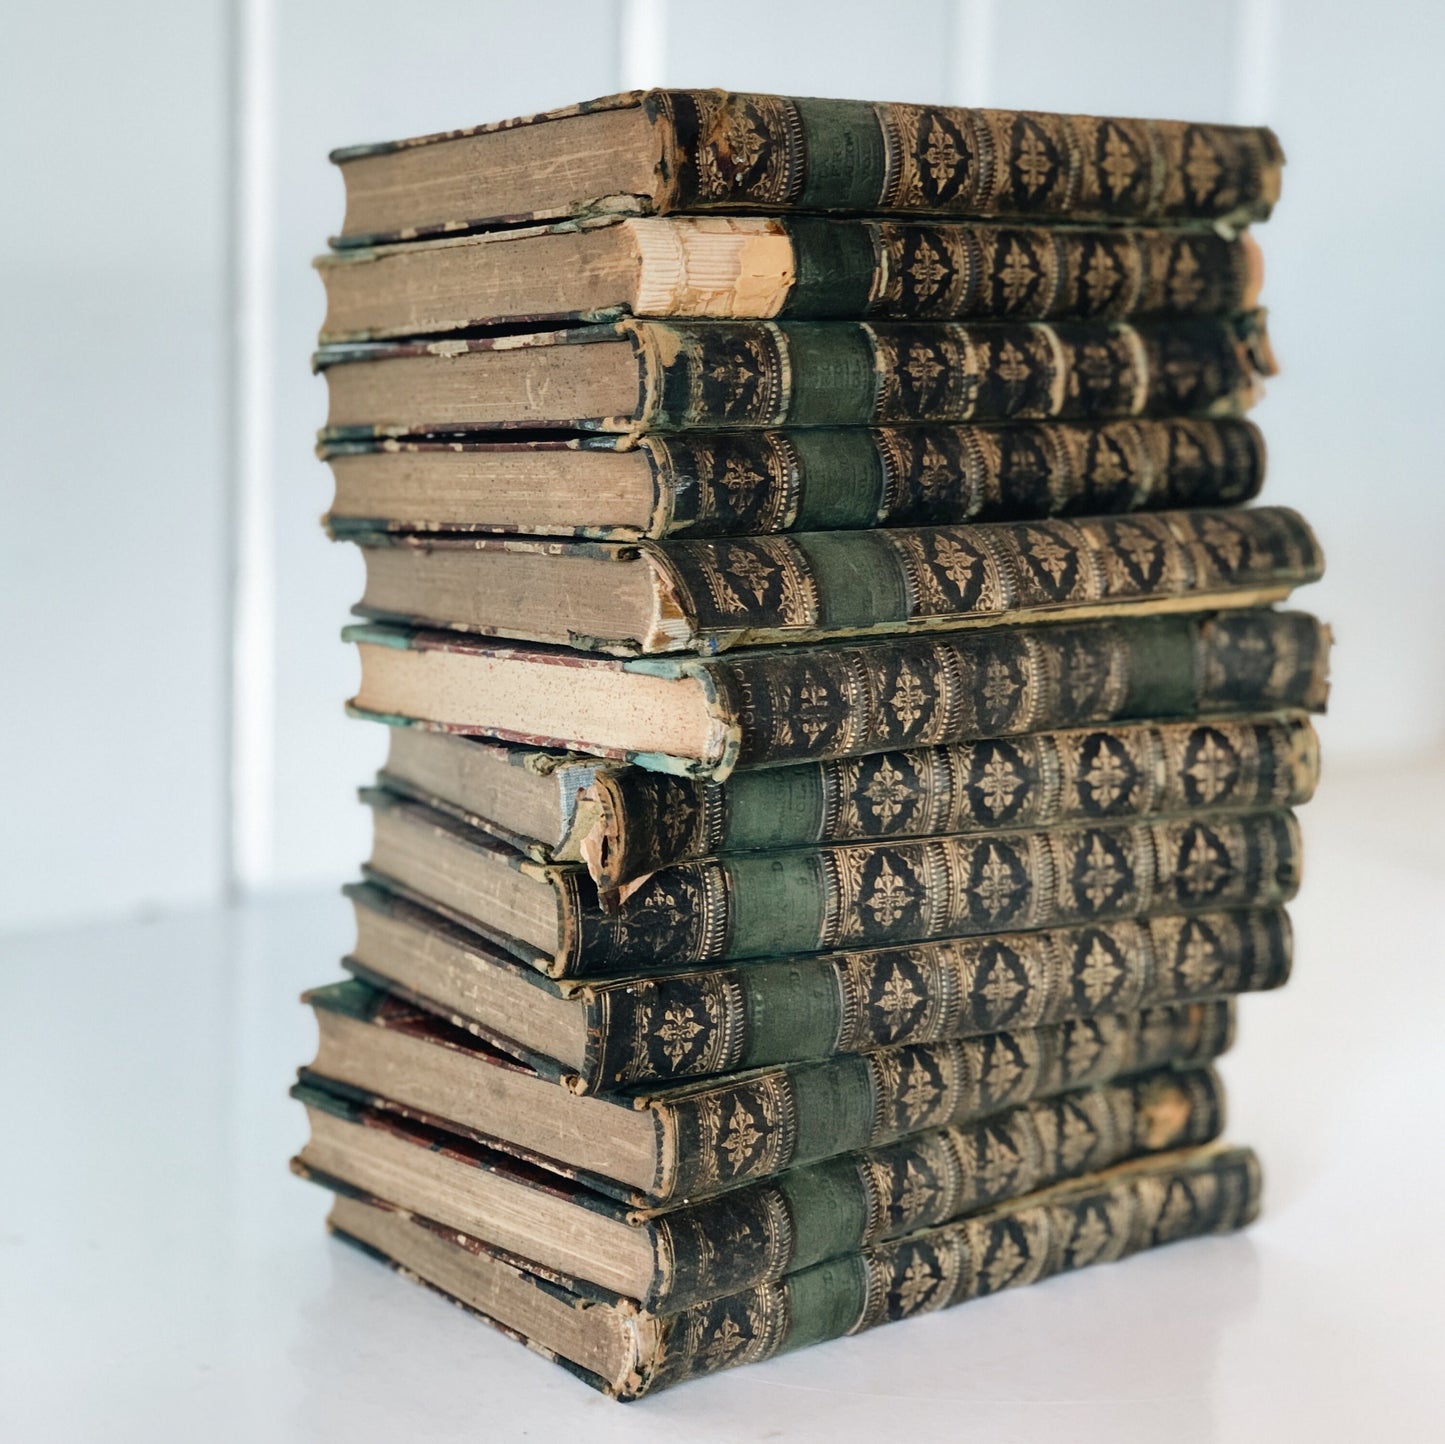 4-Volume Antique Shabby Leather-Bound, Tales From Blackwood, 1800s Book Bundle